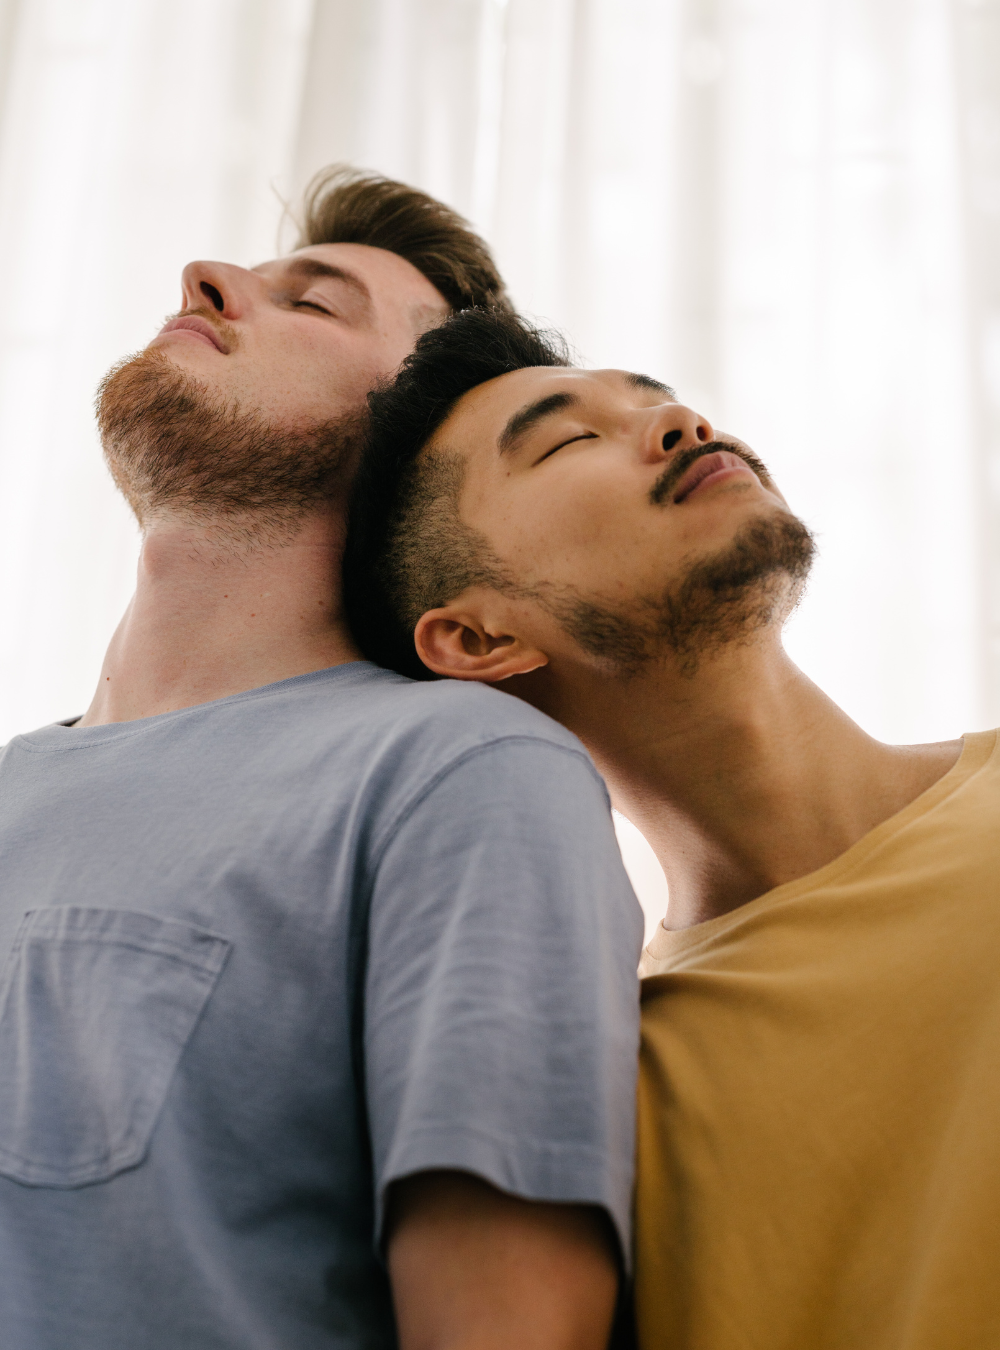 Cognitive and Behavioral Resilience Among Young Gay and Bisexual Men Living With HIV